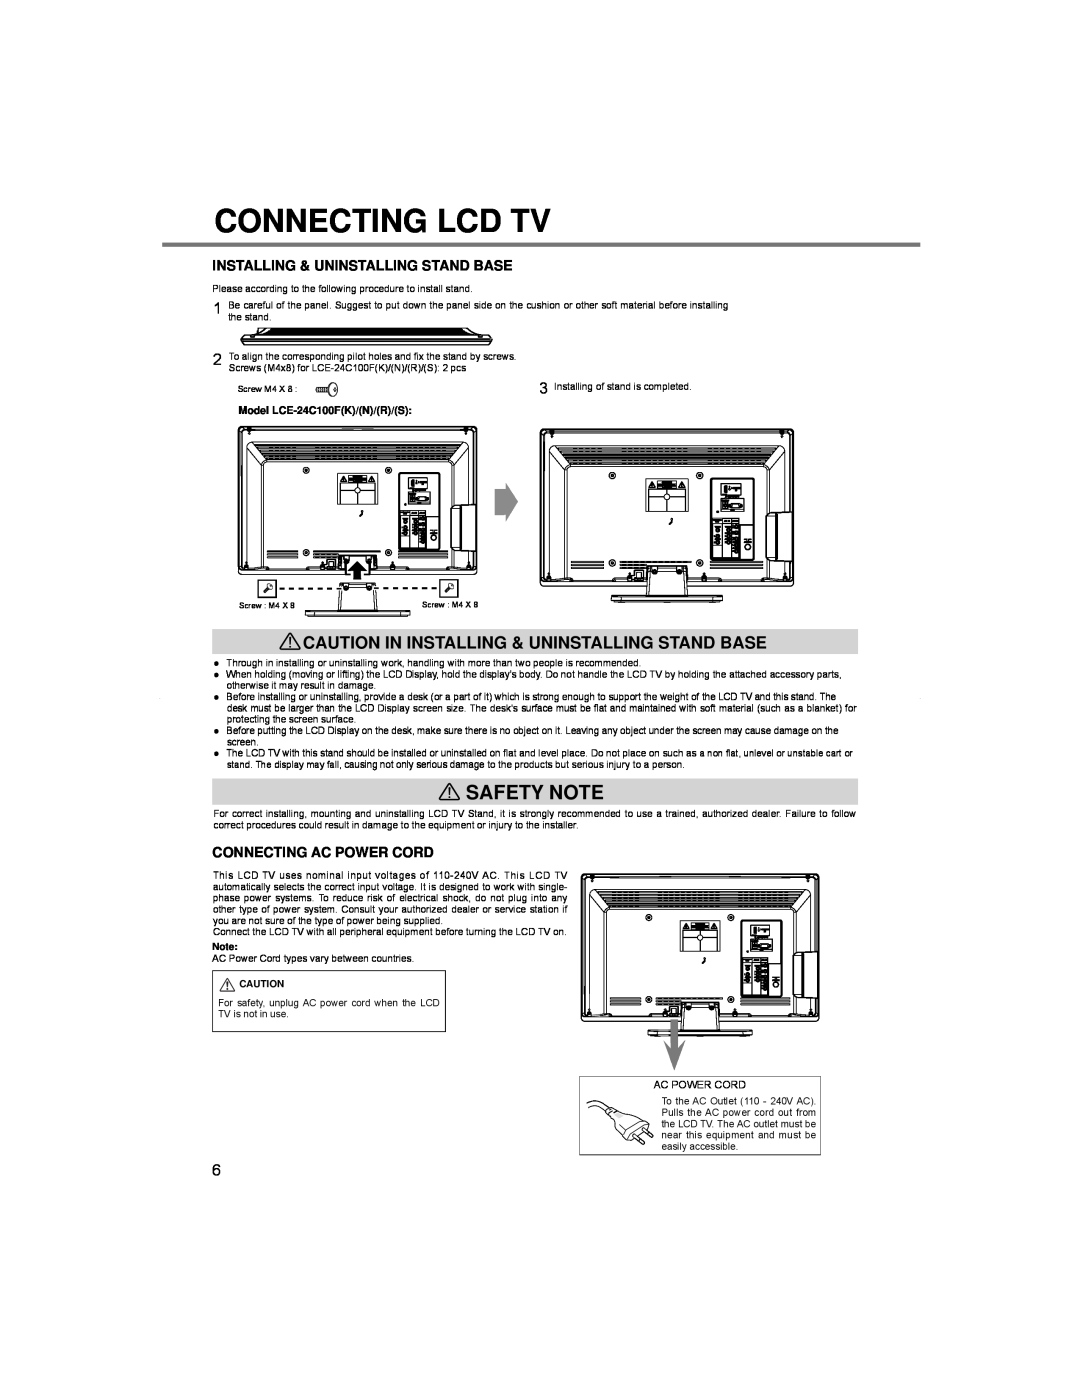 Sanyo LCE-24C100F(K), LCE-24C100F(S) Connecting Lcd Tv, Safety Note, Caution In Installing & Uninstalling Stand Base 